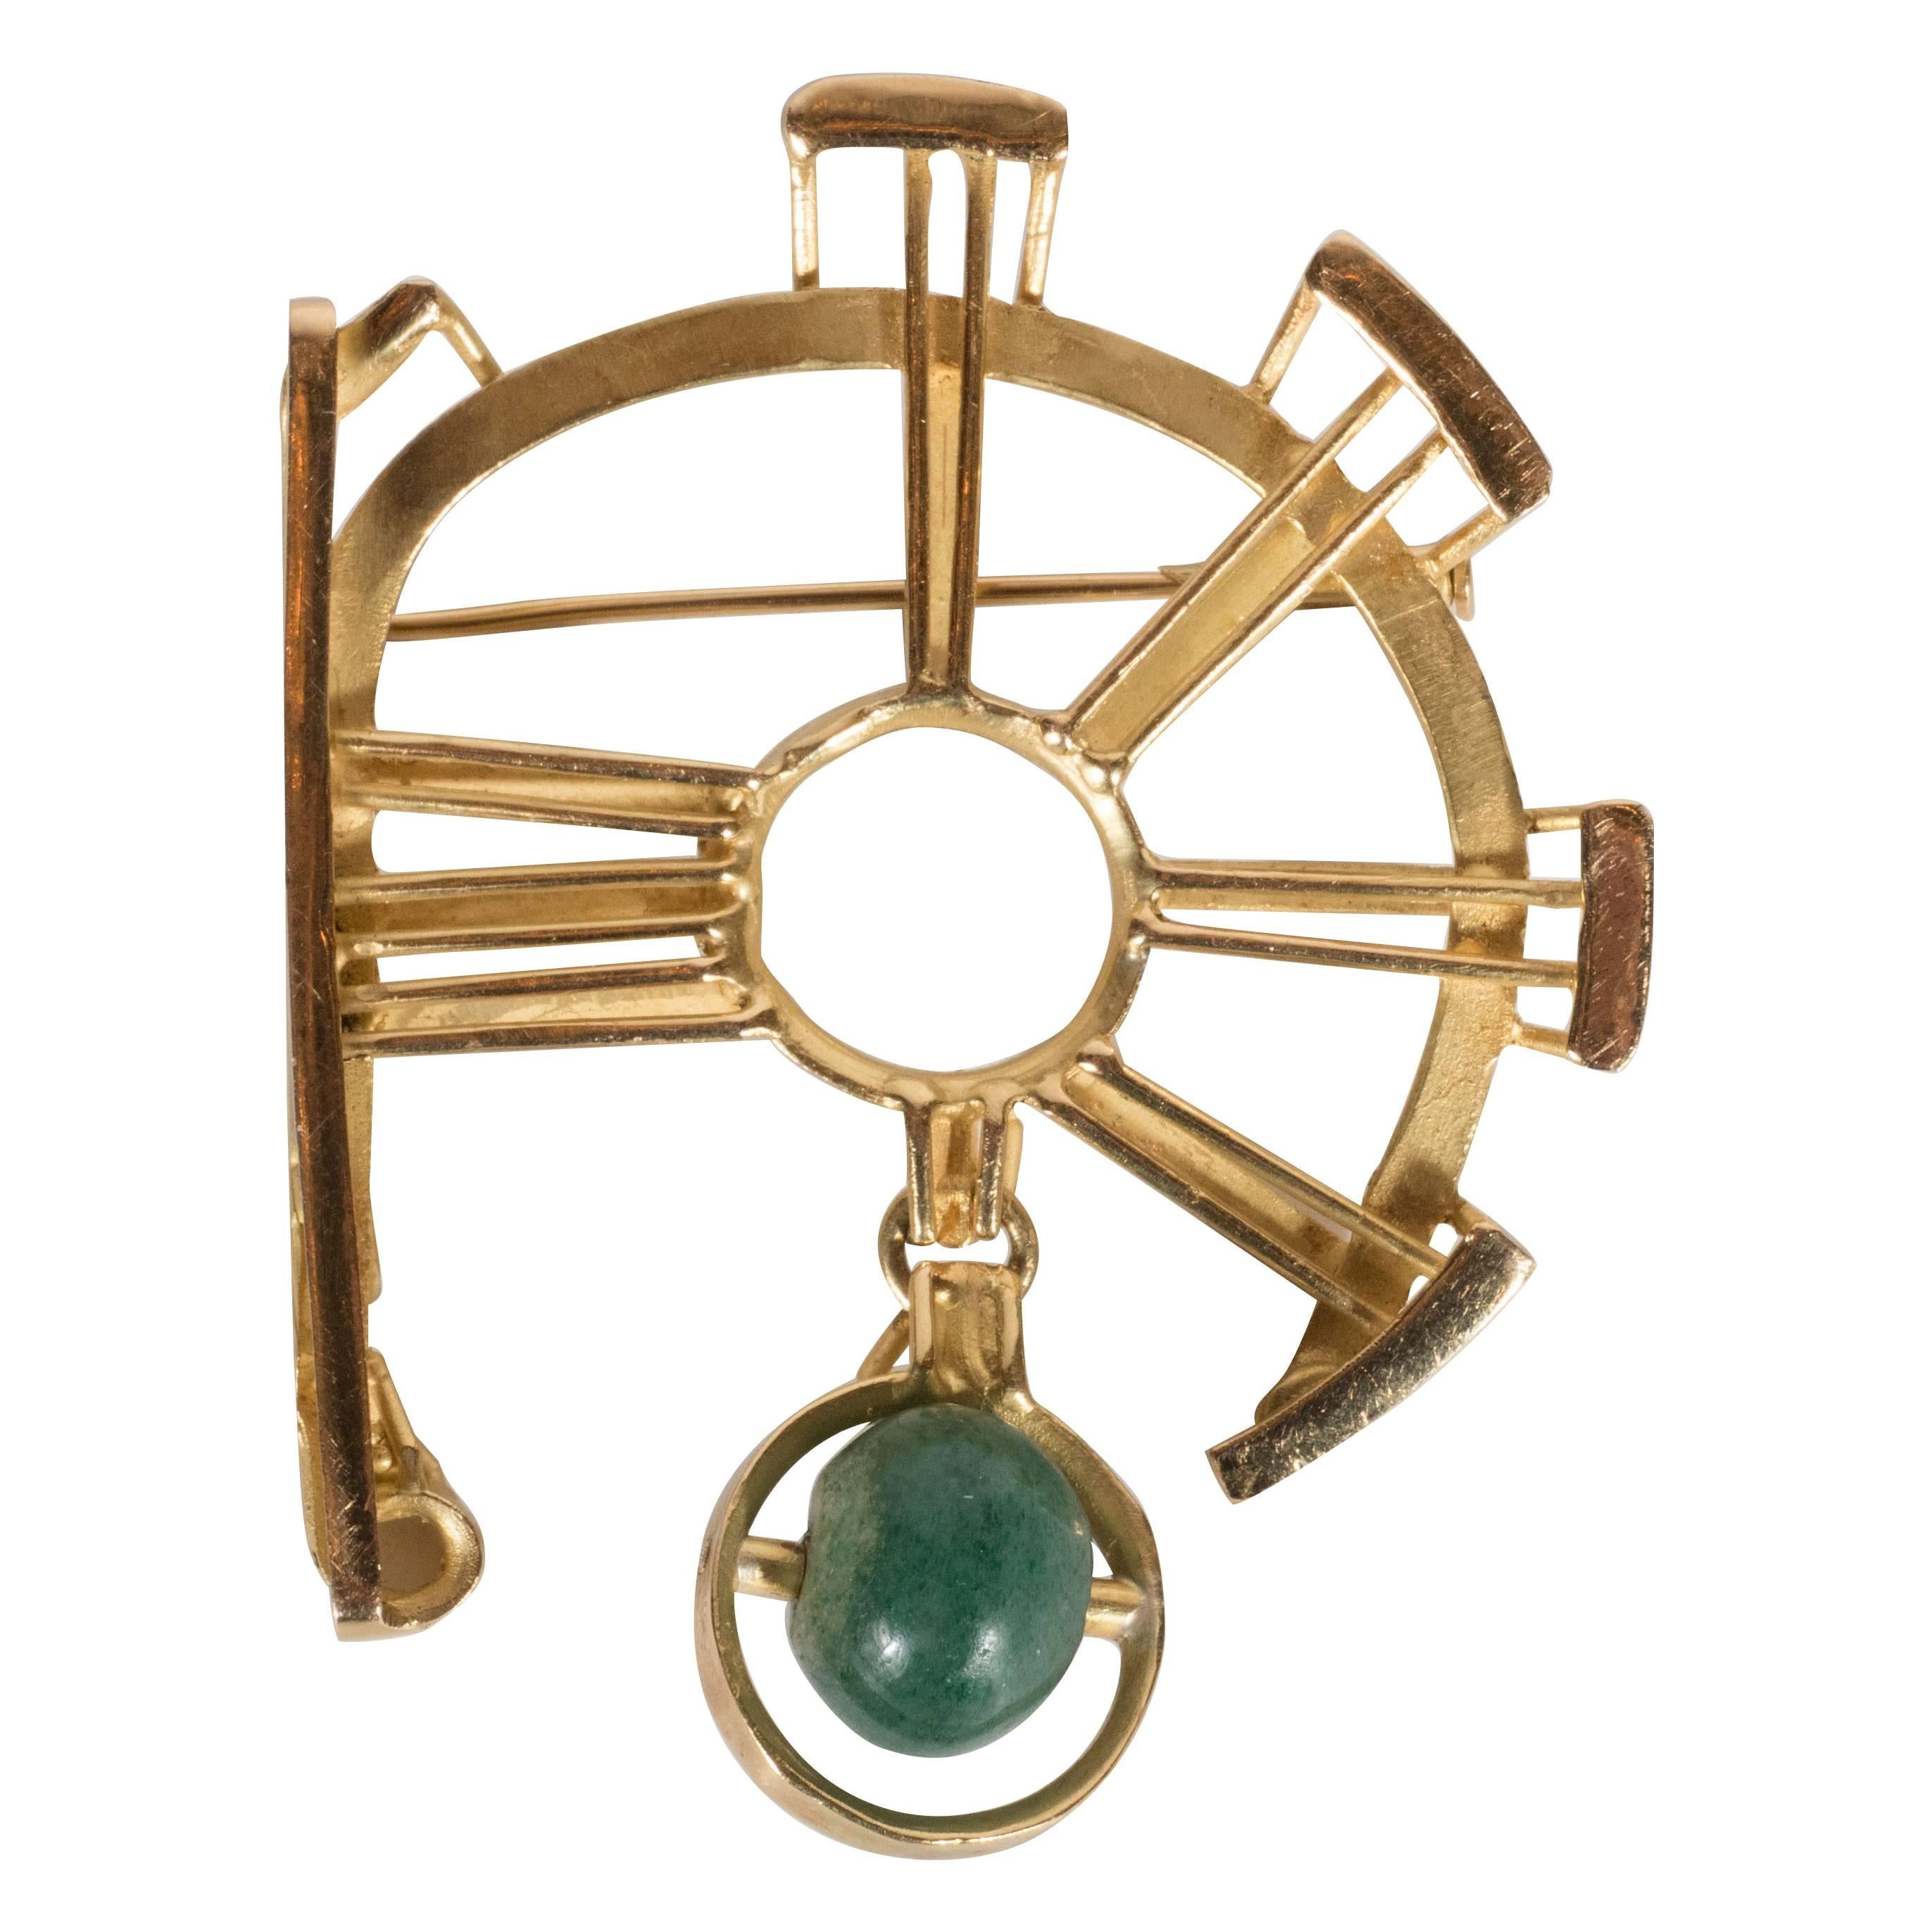 This dynamic geometric brooch features vertical stokes in 18 karat yellow gold emanating from a central circular form. A serpentine jade wheel on a horizontal axis hangs from one of these stokes, encompassed by a circle that echoes the central form.